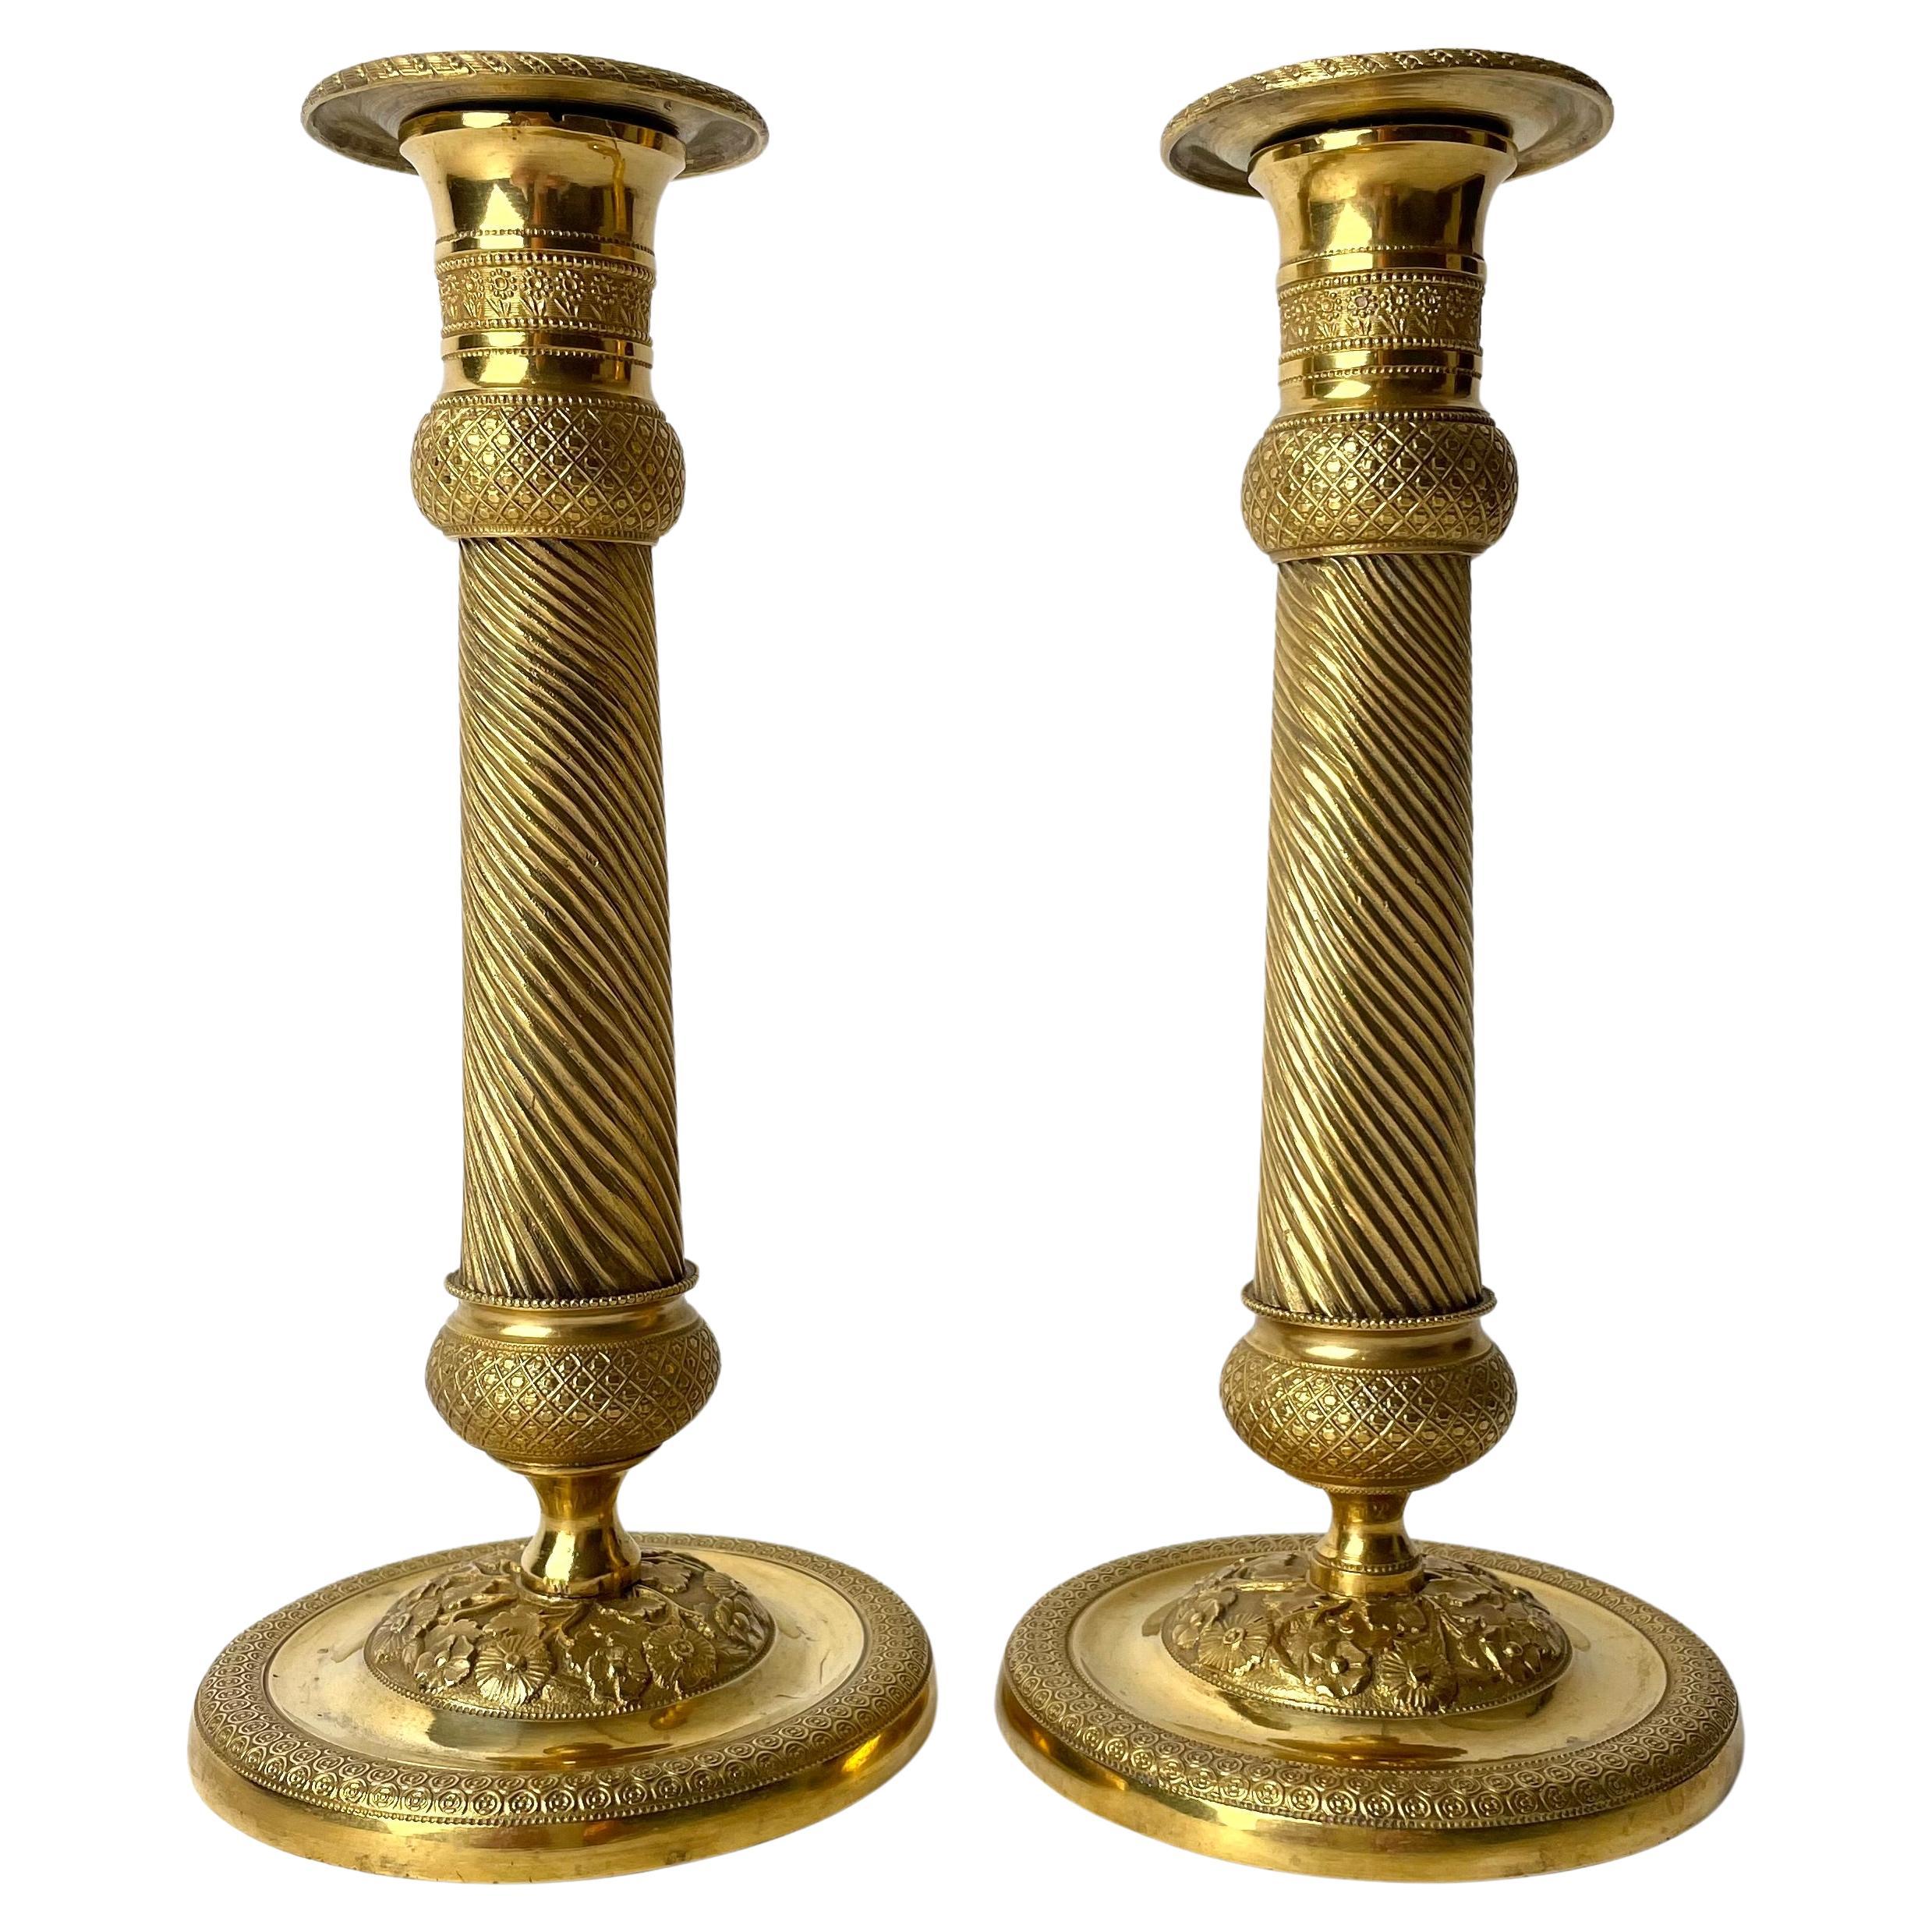 Pair of Gilded French Empire Candlesticks with charming decor from the 1820s